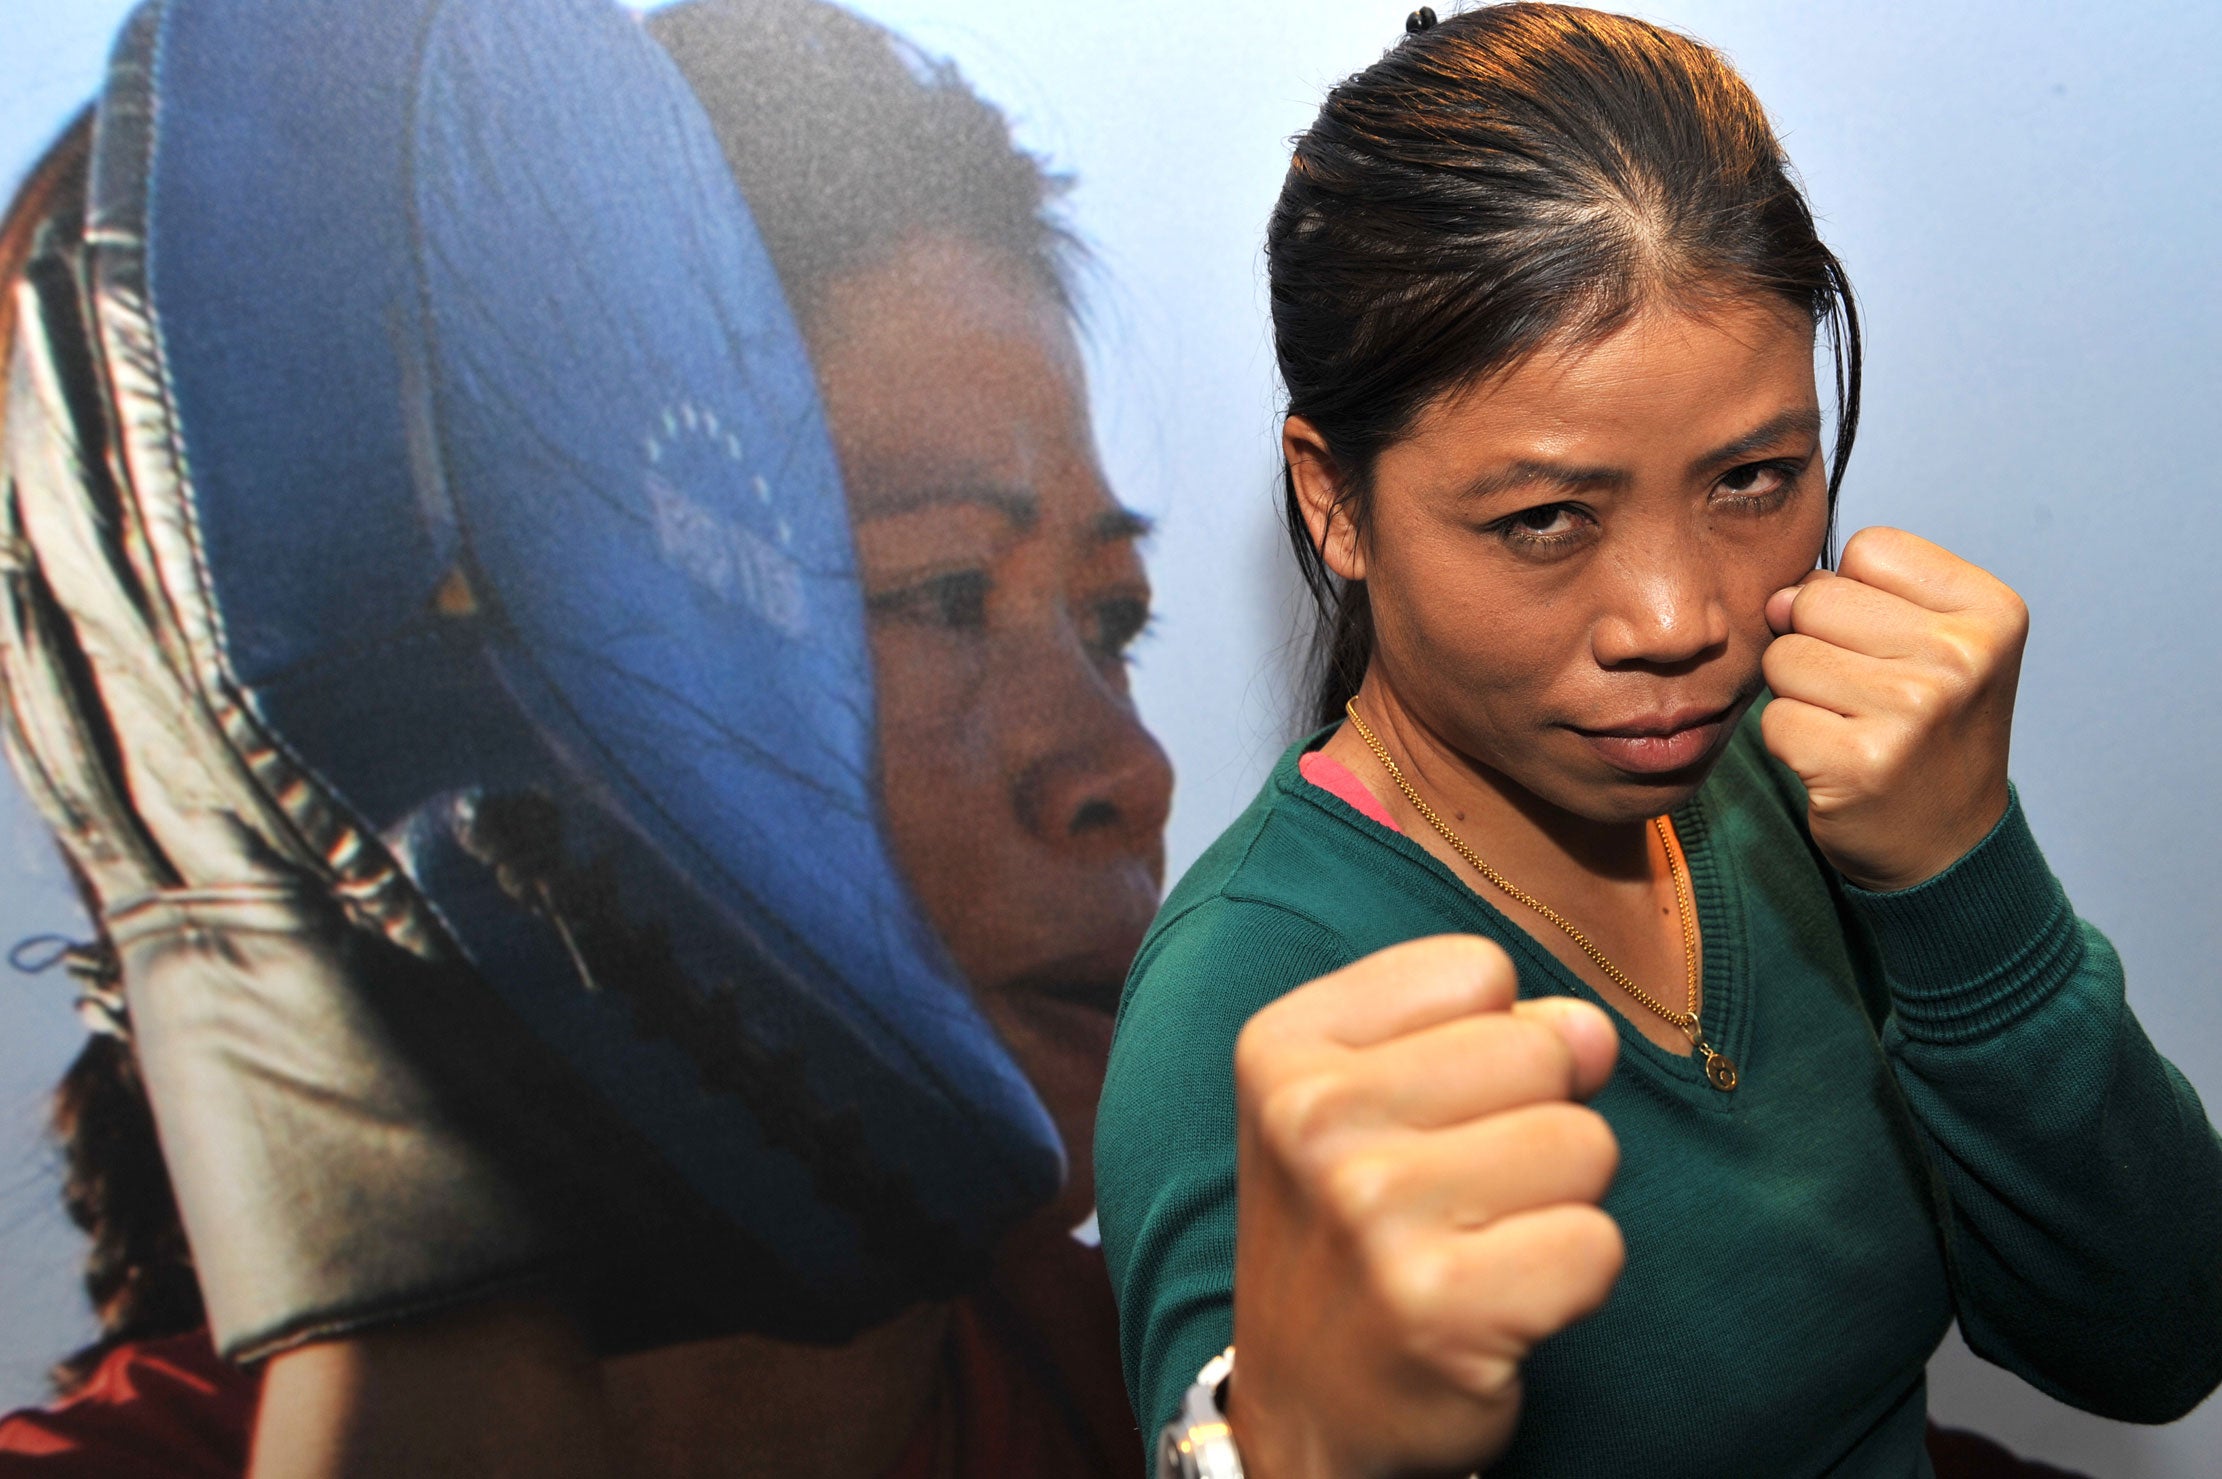 Olympic Boxer, Mary Kom at the London launch of Vodafone's Firsts initiative.